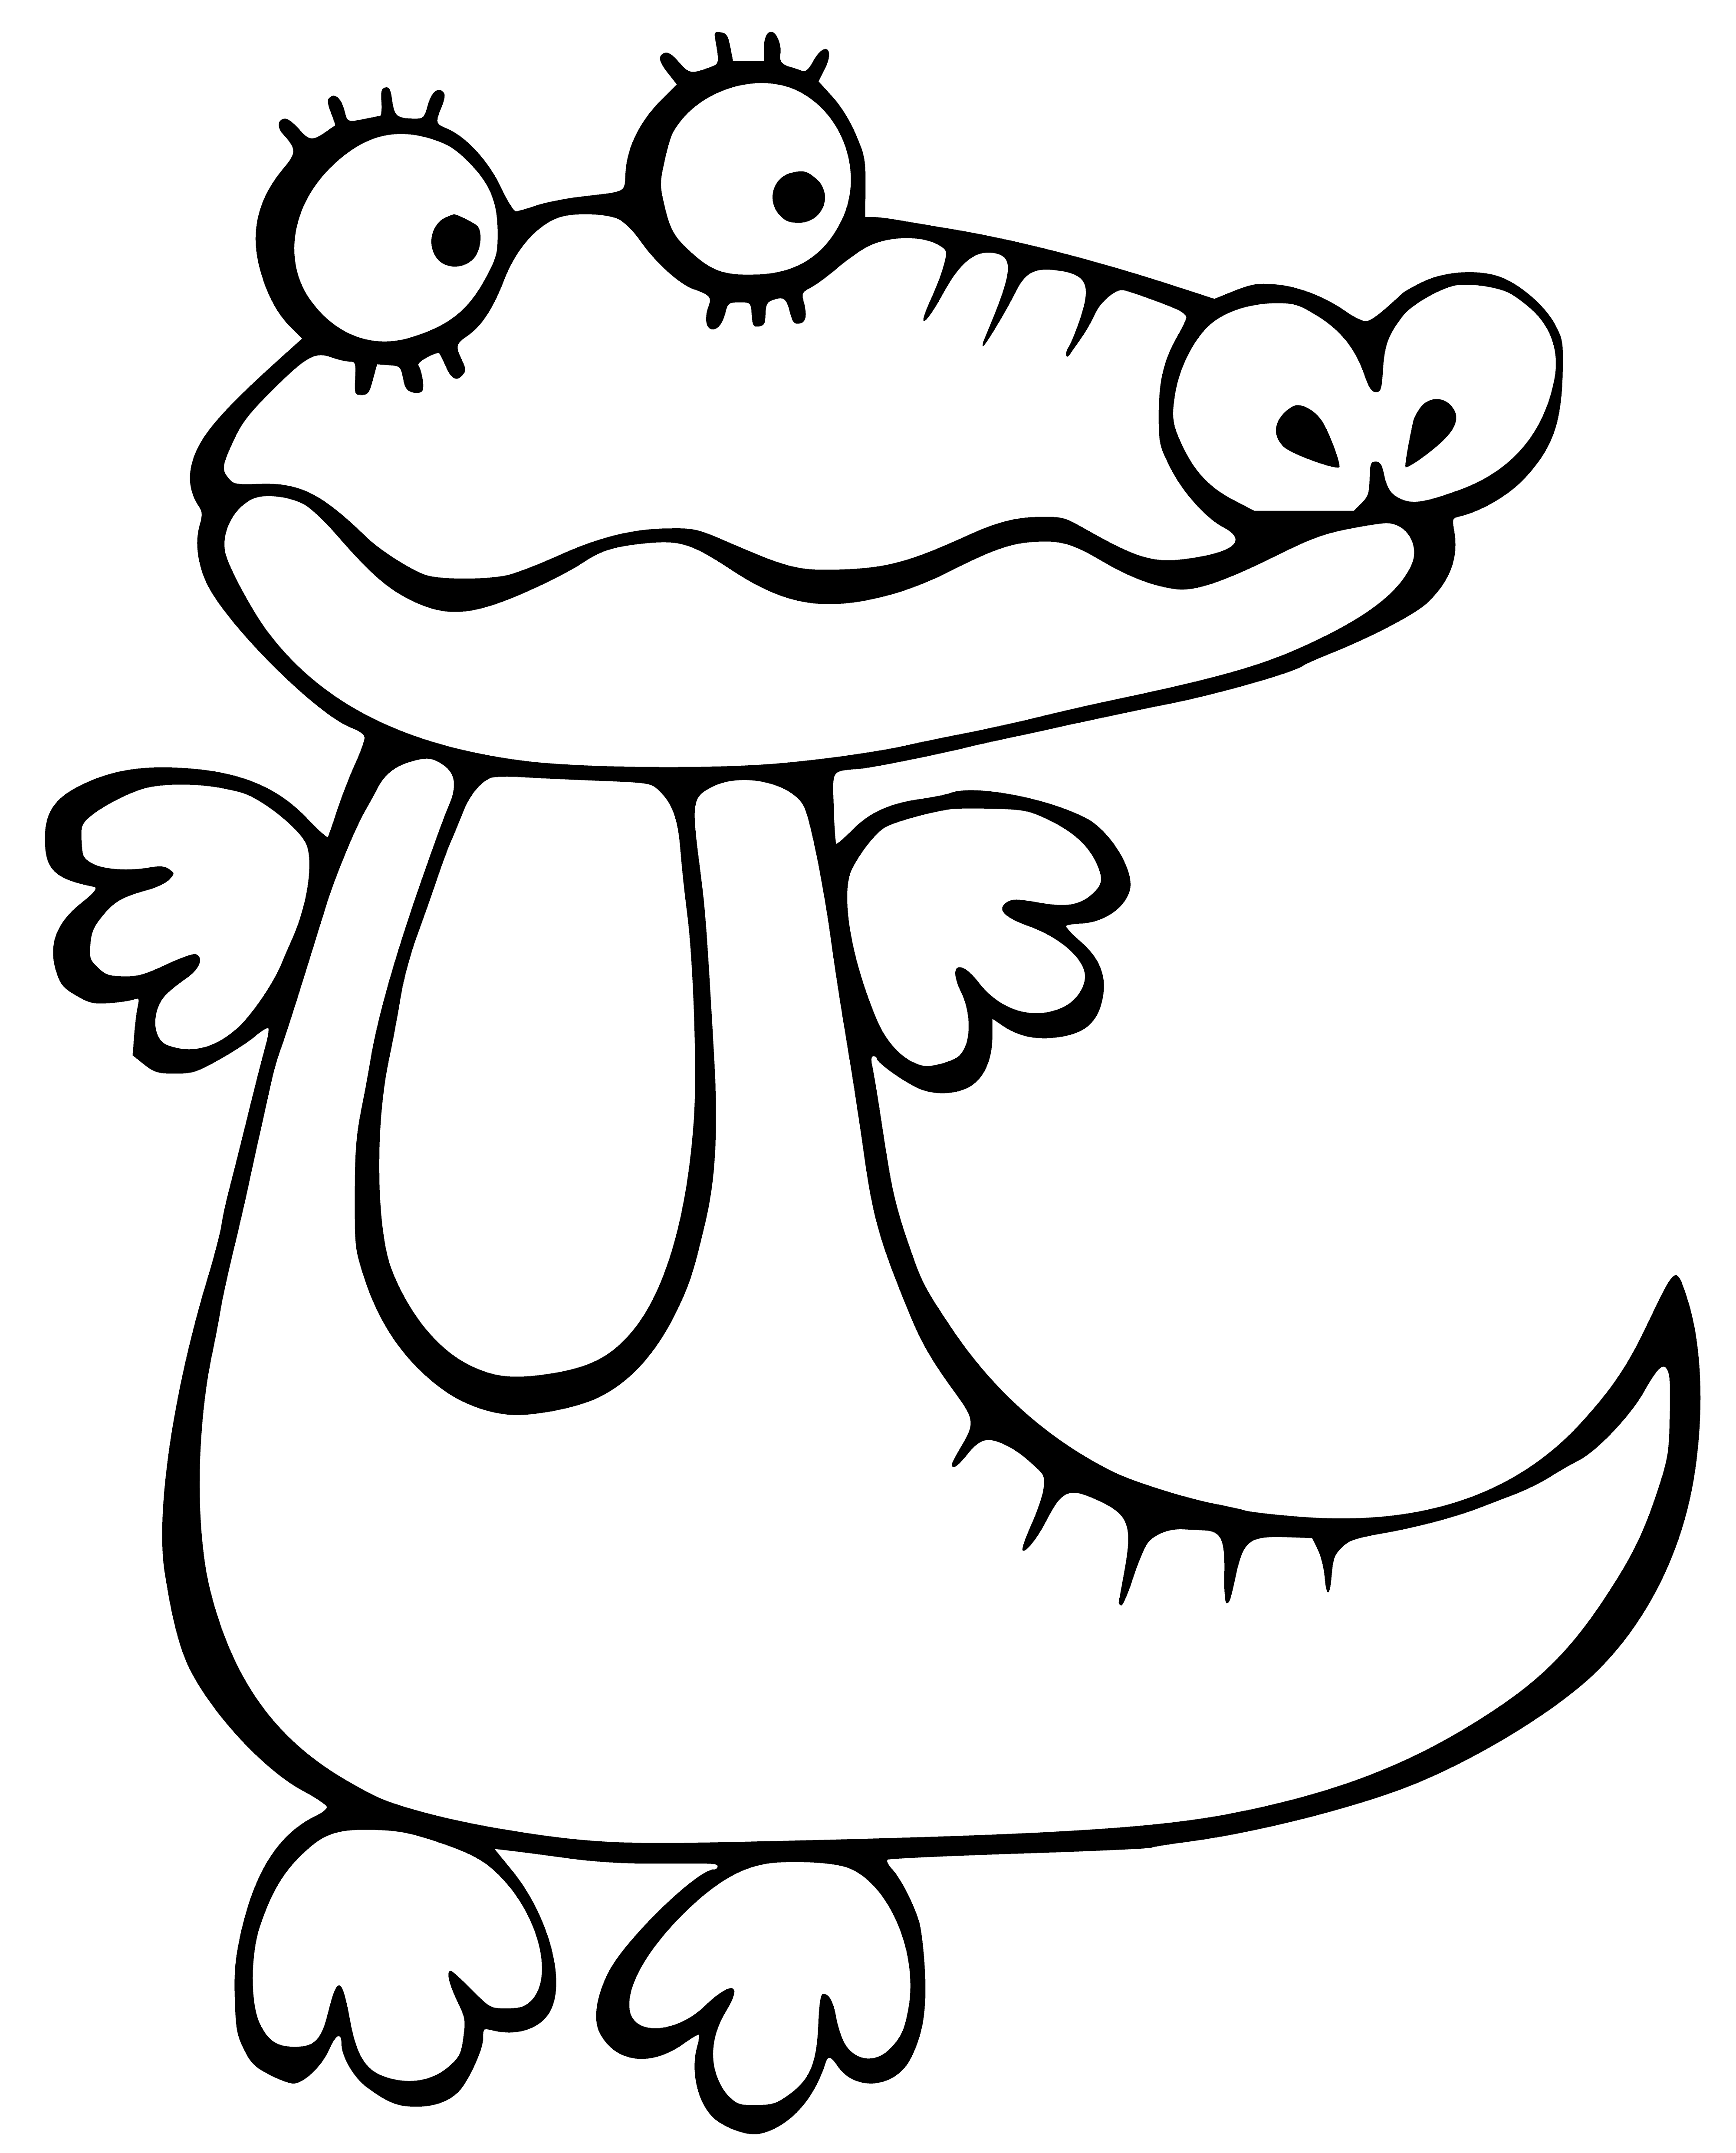 coloring page: Large reptile sun basking in jungle river; long, scaly body; triangular head, large teeth; green skin with black spots.